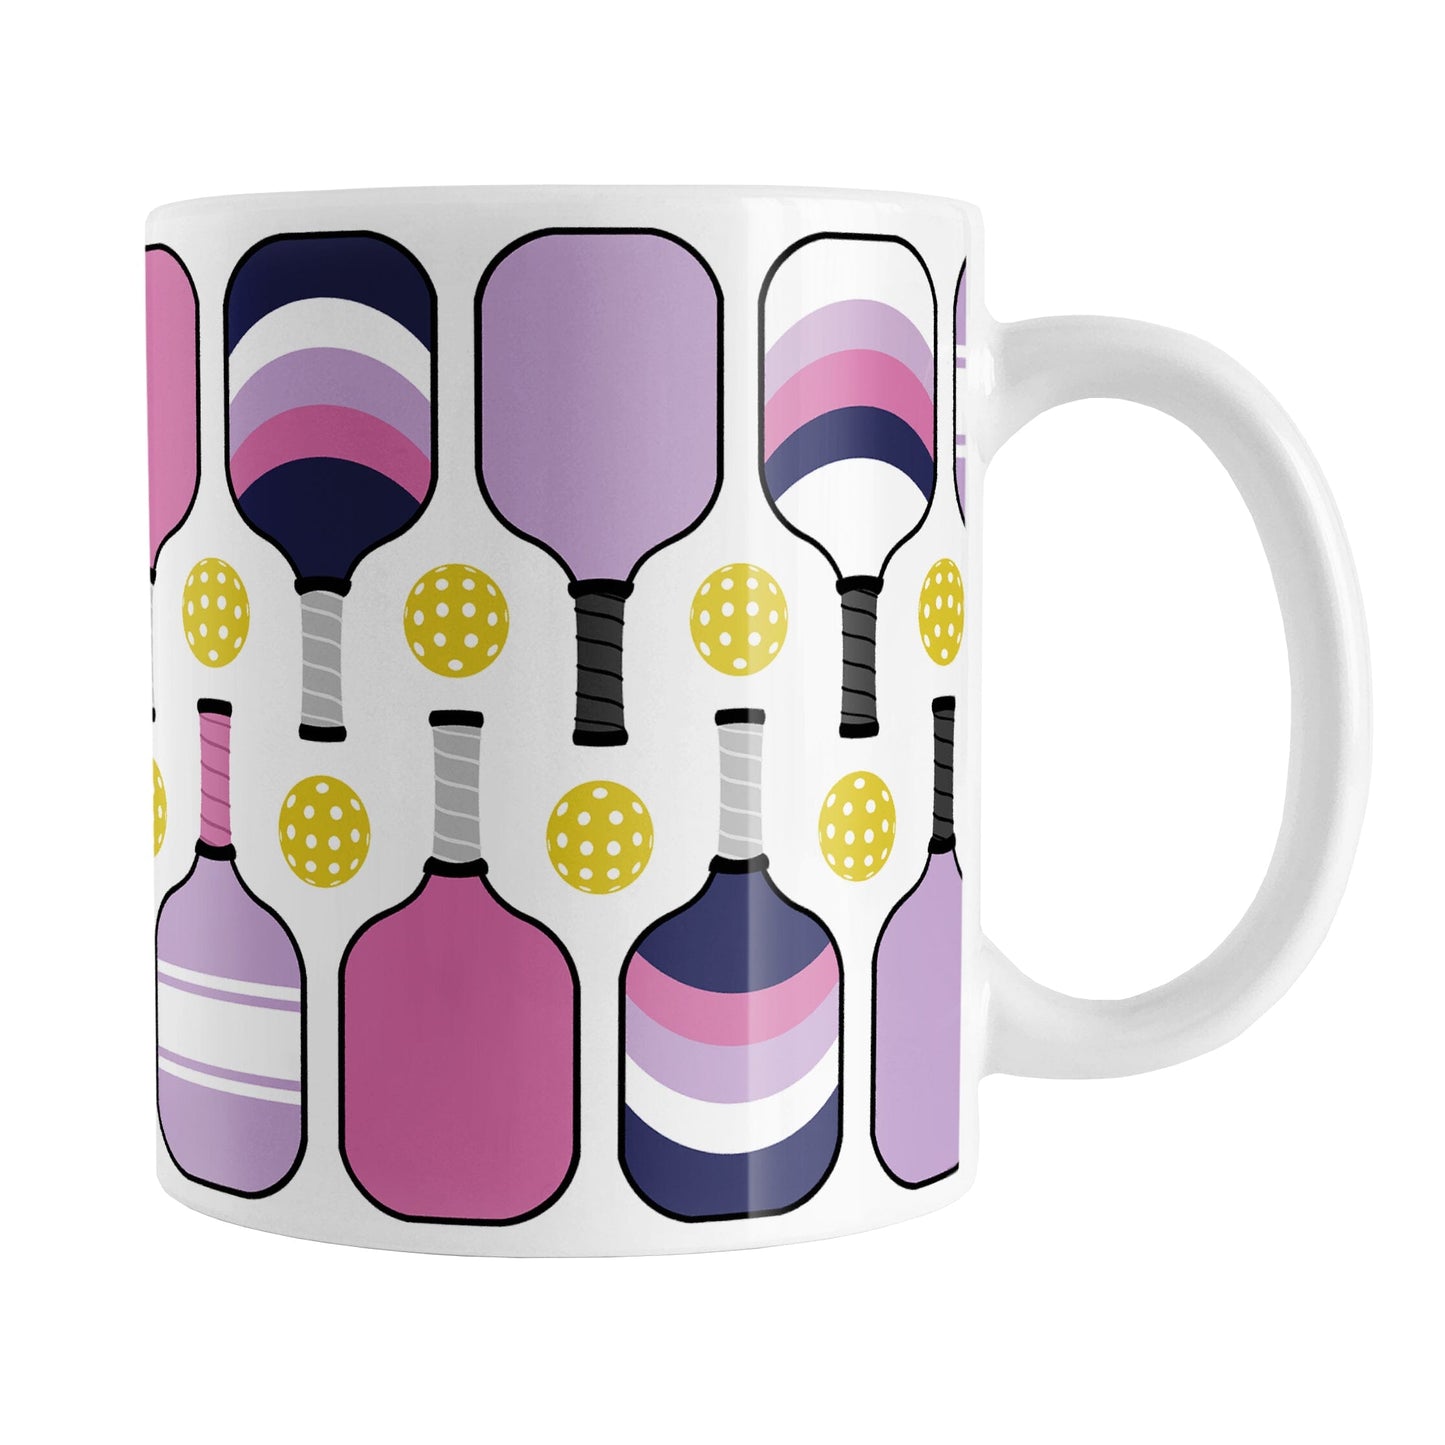 Pink Purple Navy Pickleball Mug (11oz) at Amy's Coffee Mugs. A ceramic coffee mug designed with modern pickleball paddles in bold pink, light purple, and dark navy blue, along with yellow balls in a pattern that wraps around the mug up to the handle.